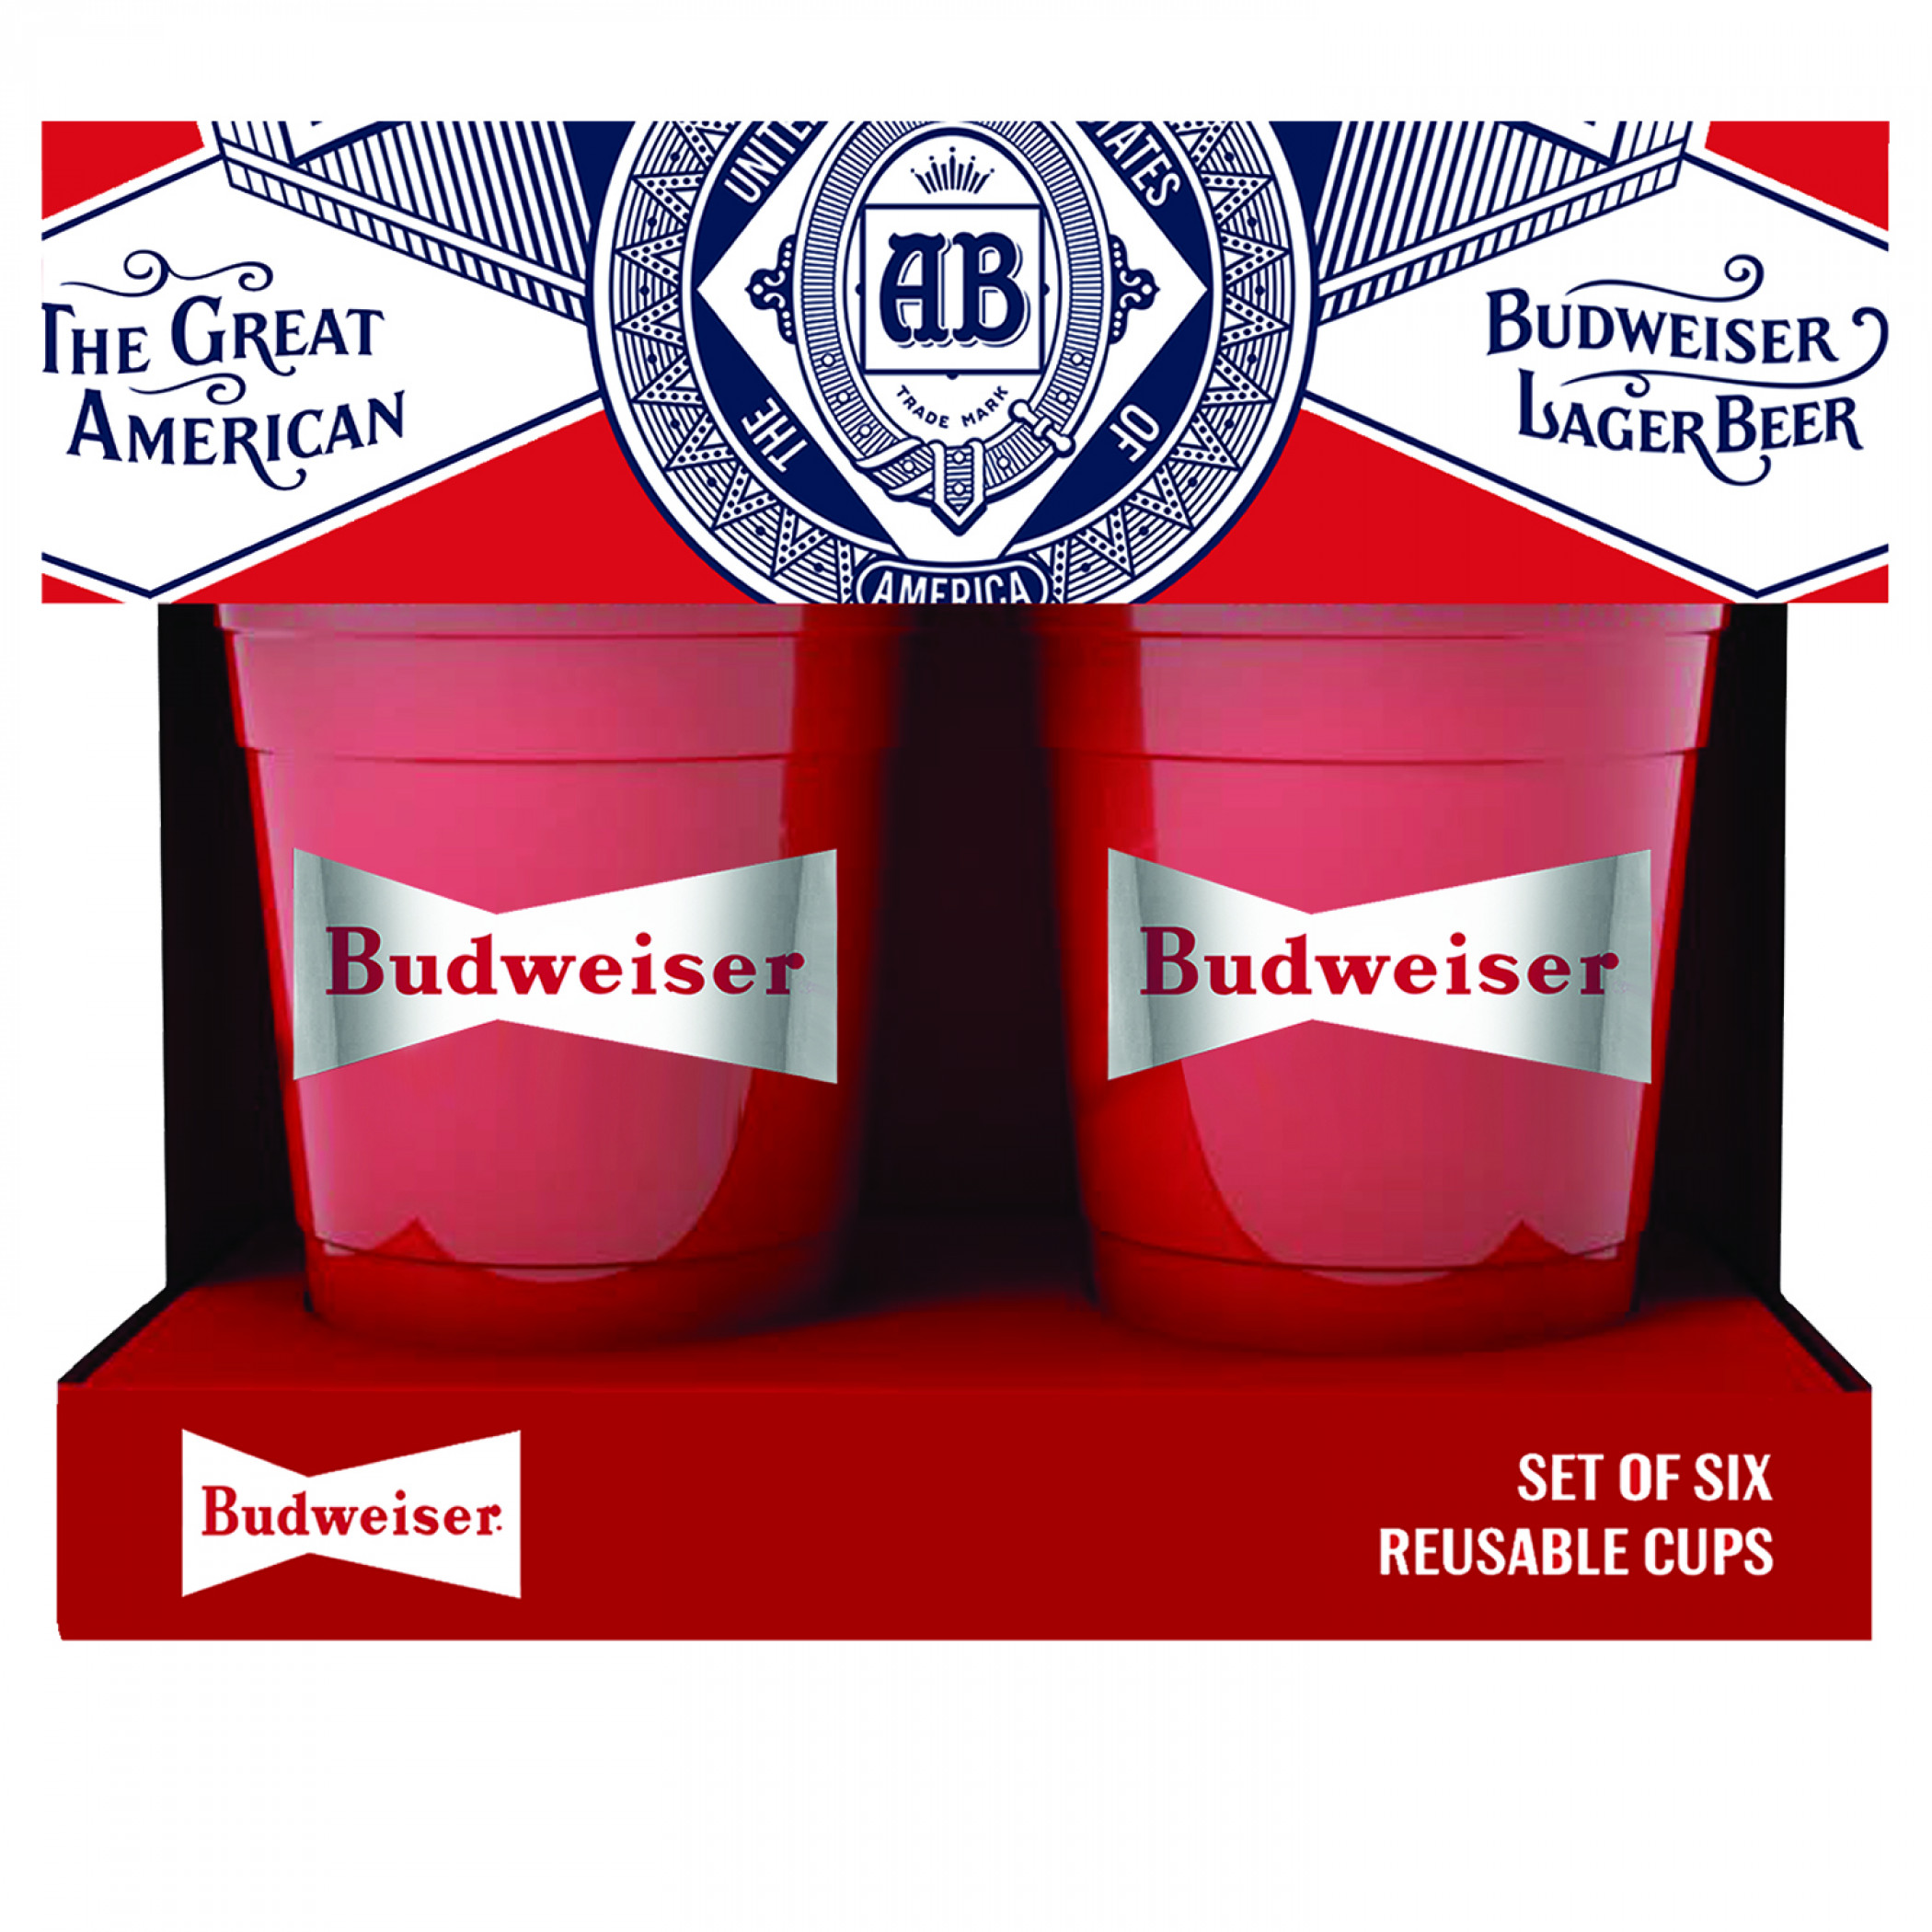 https://mmv2api.s3.us-east-2.amazonaws.com/products/images/Copy%20of%20budweiser_6pk_front.jpg